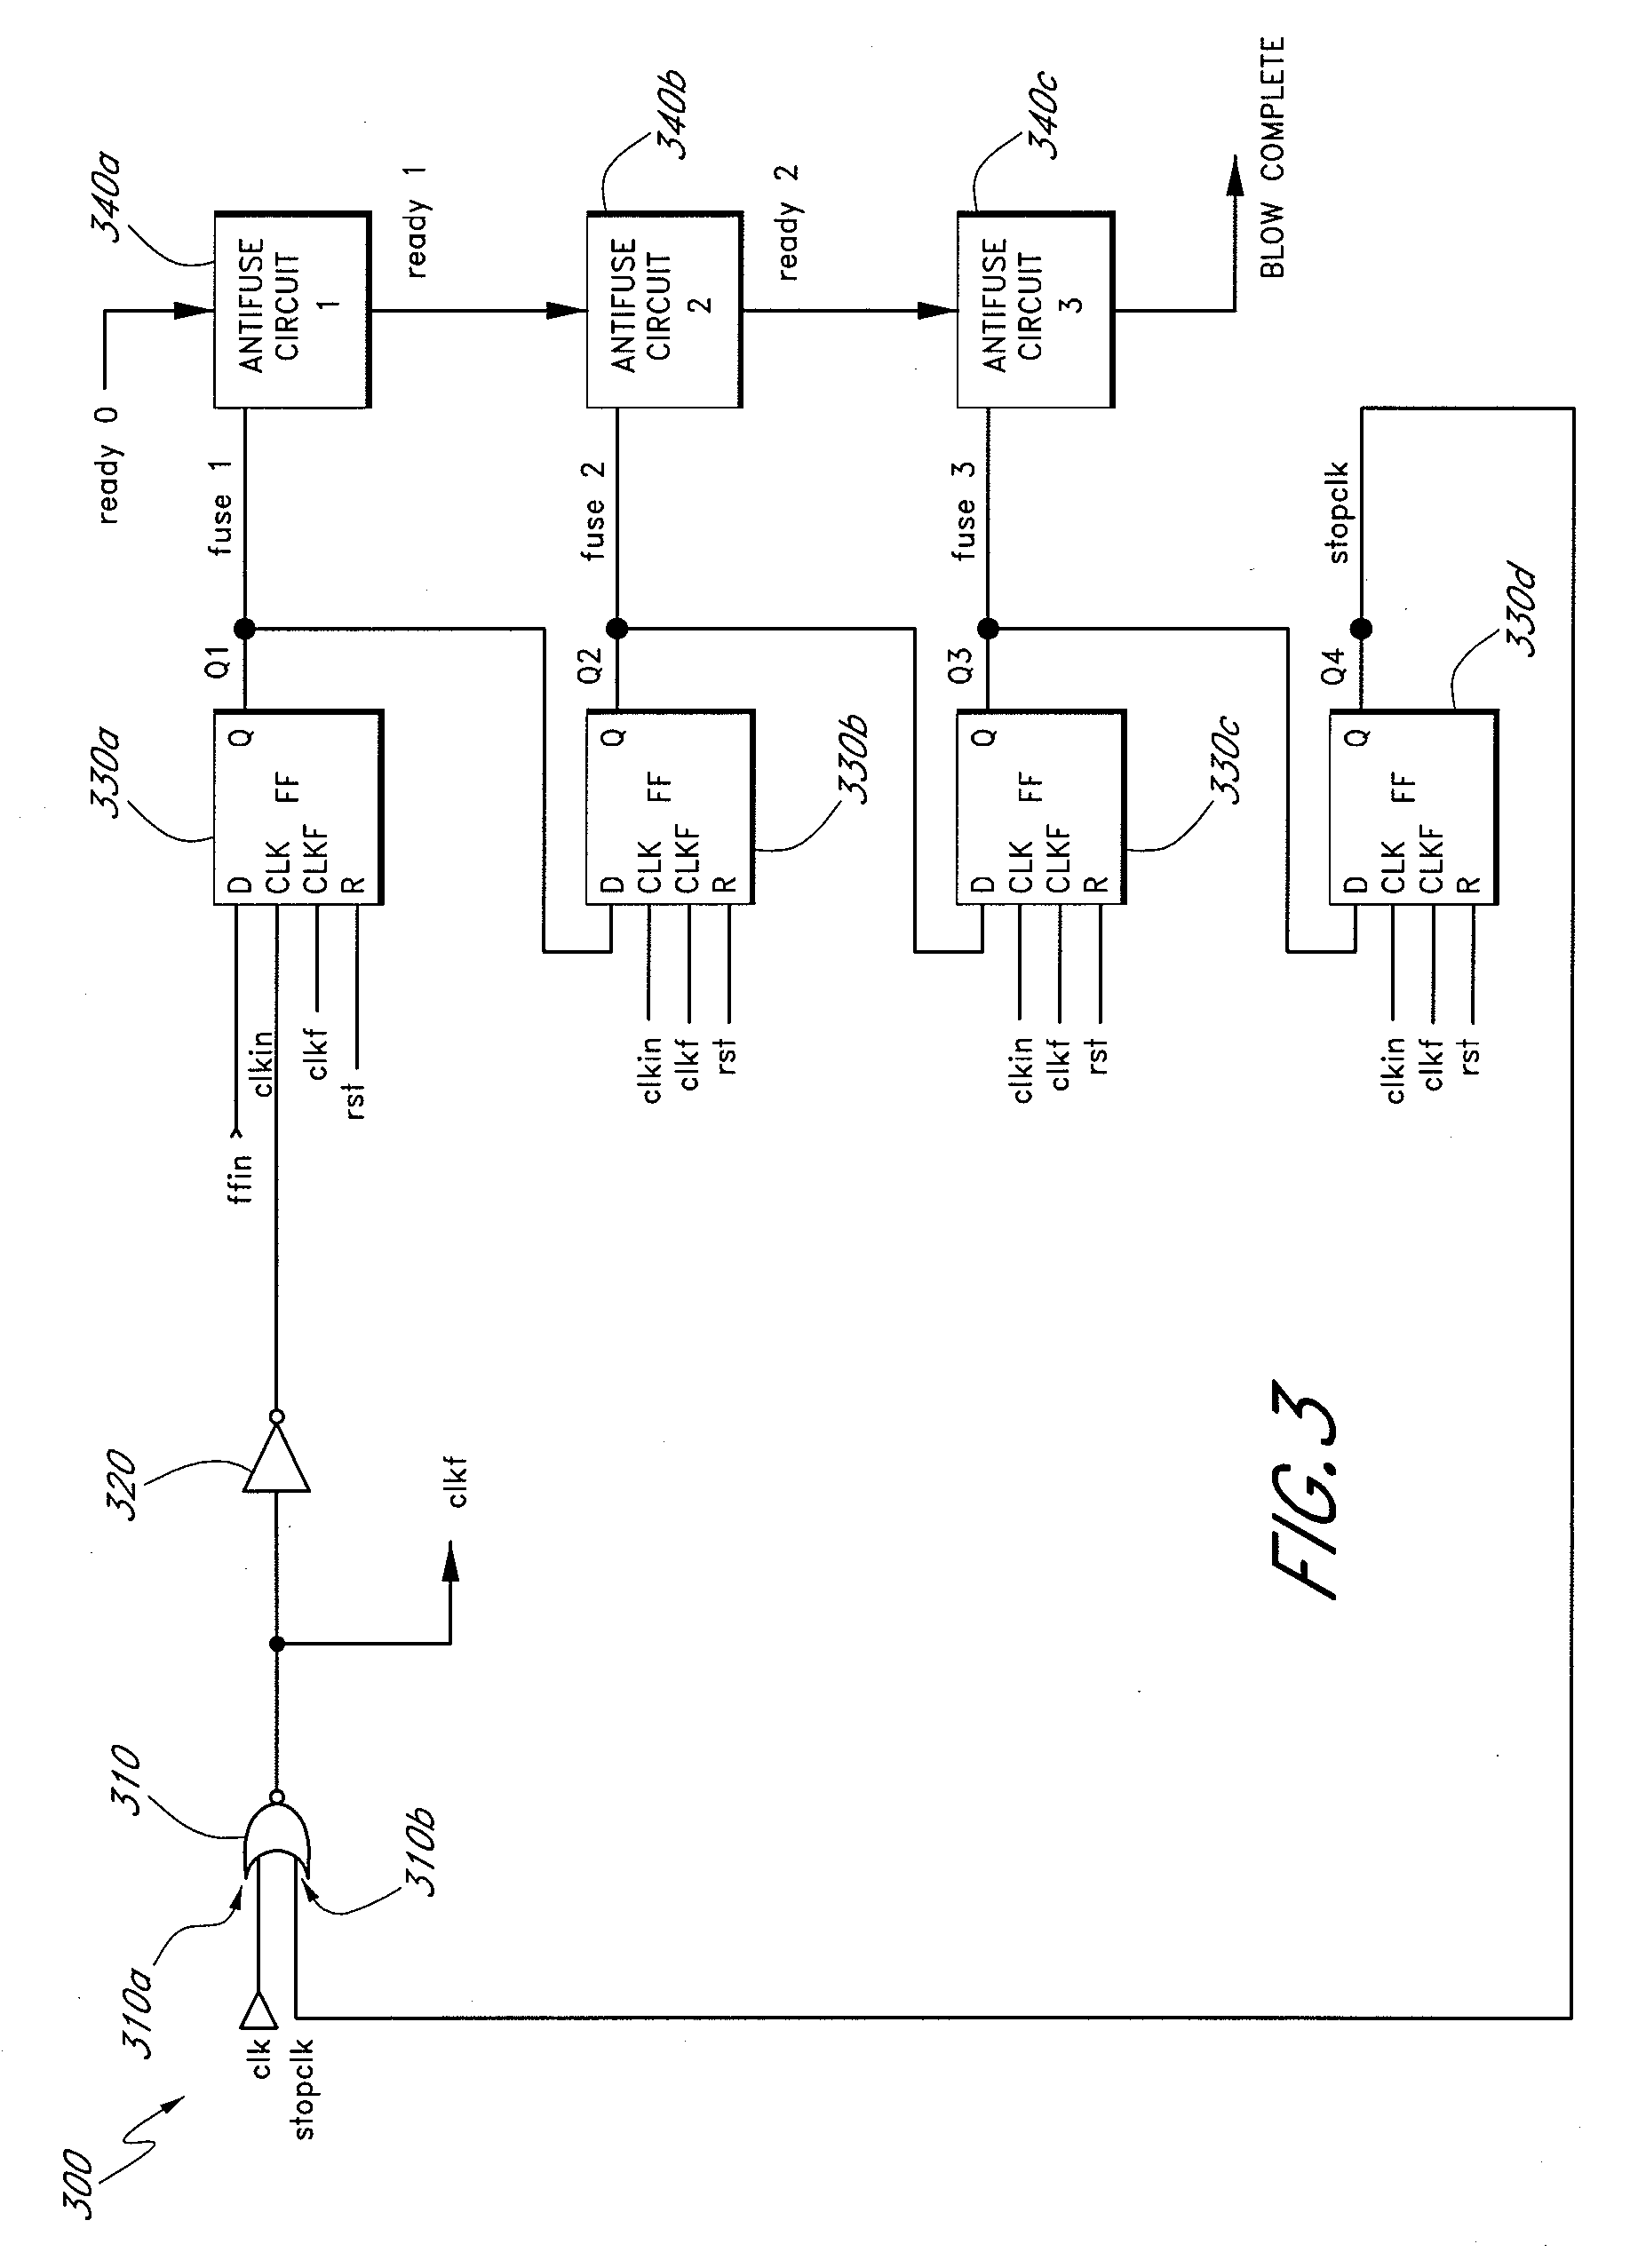 Serial system for blowing antifuses